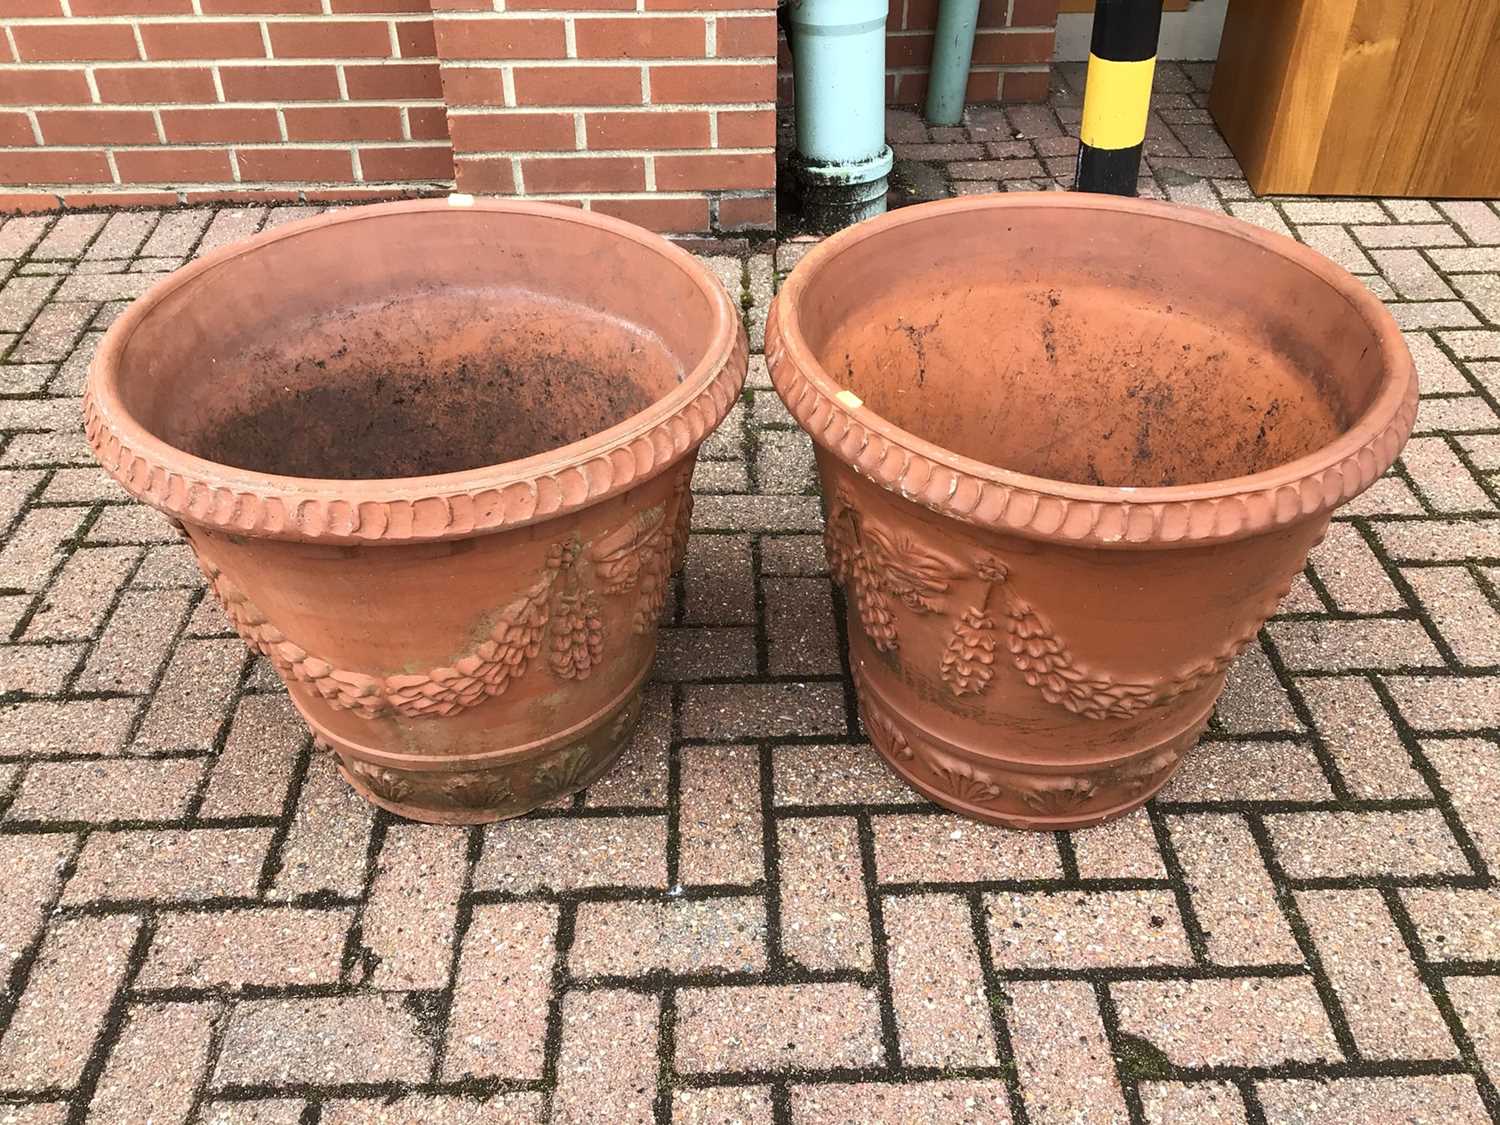 Lot 54 - Pair of large terracotta garden urns with wreath decoration 51cm x 58cm